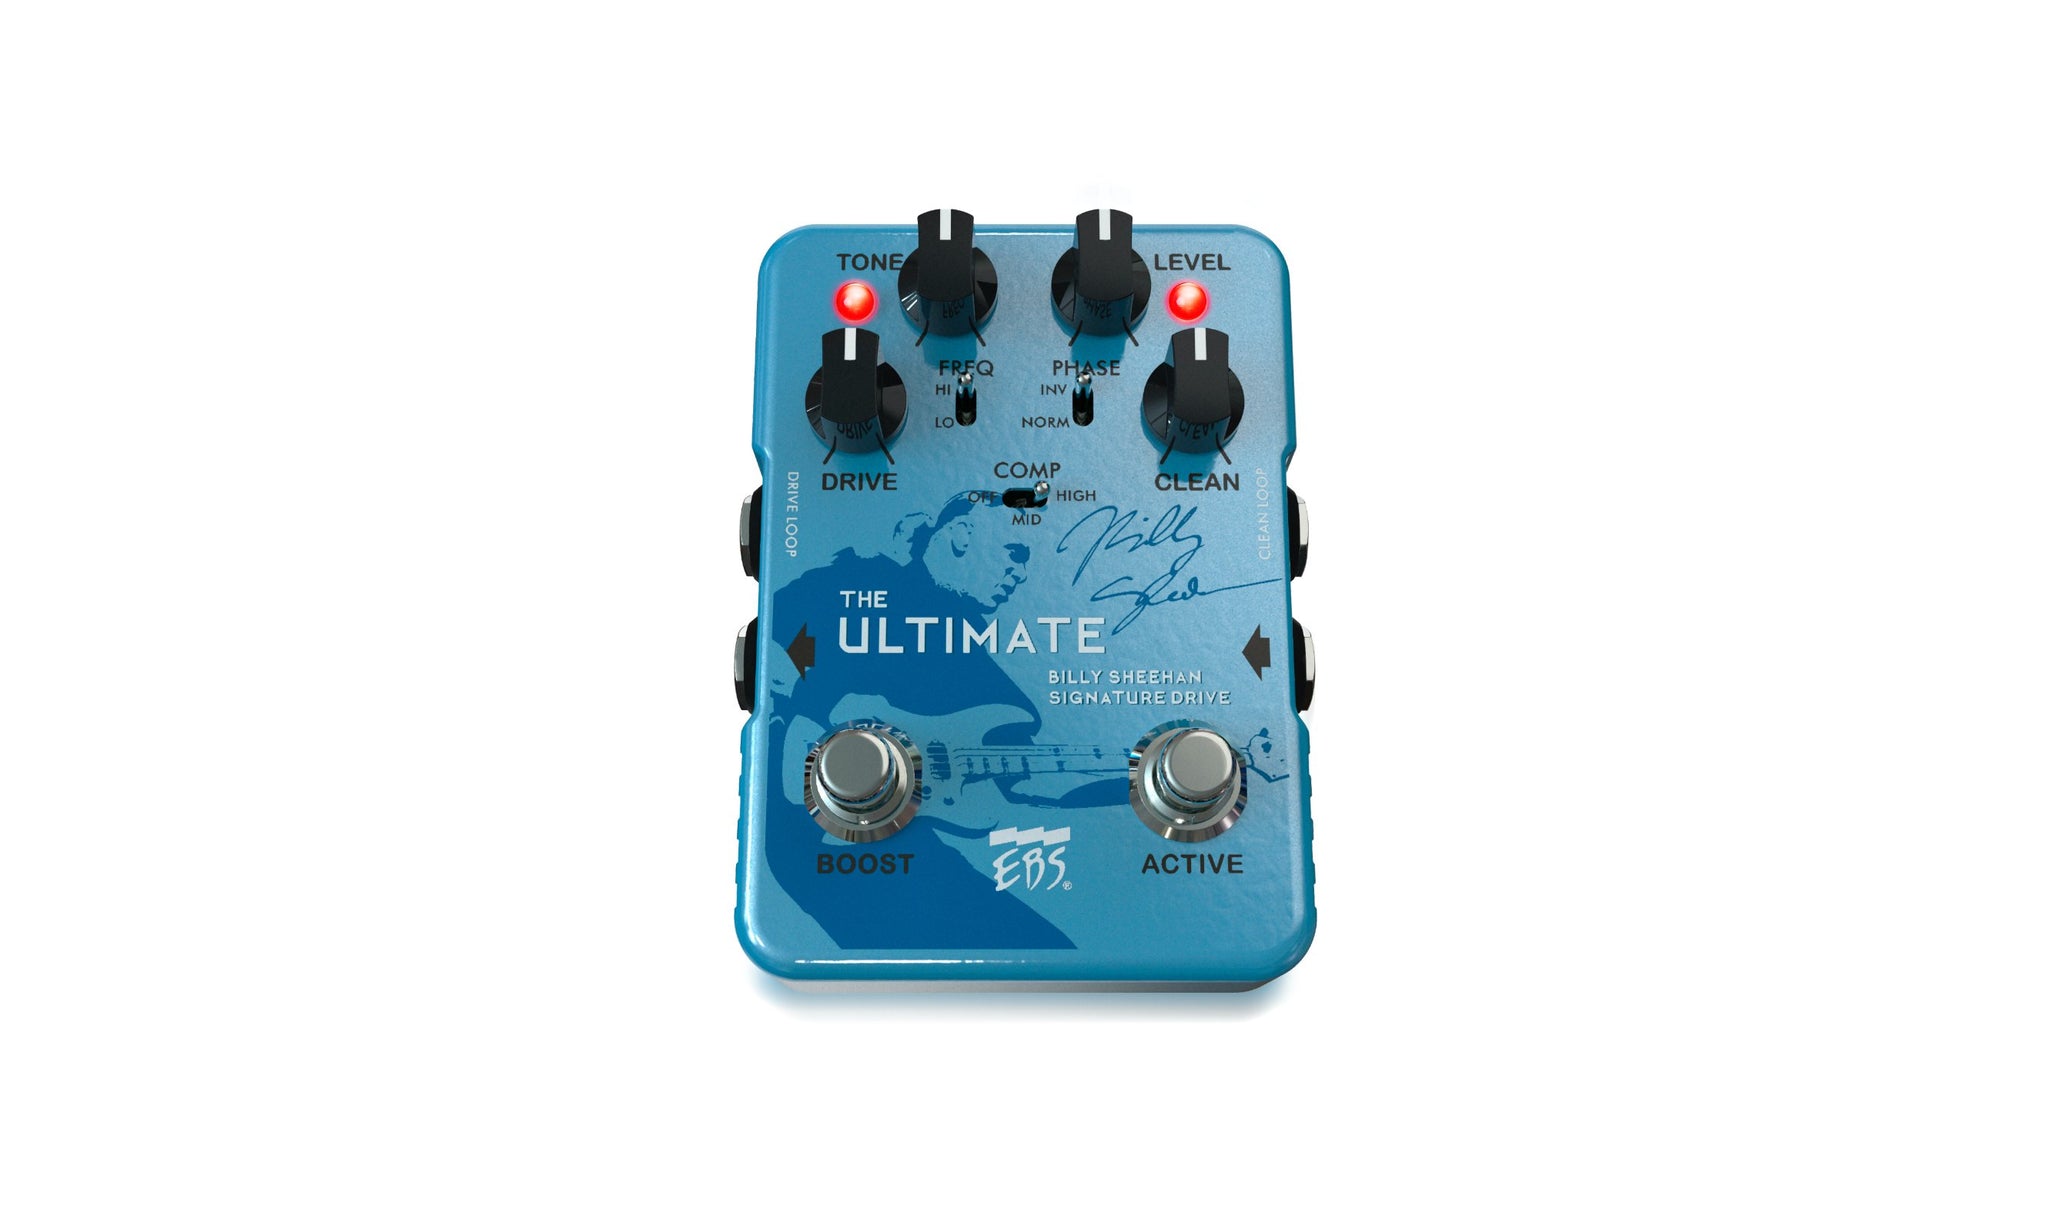 EBS Billy Sheehan Ultimate Signature Drive with extended capabilities